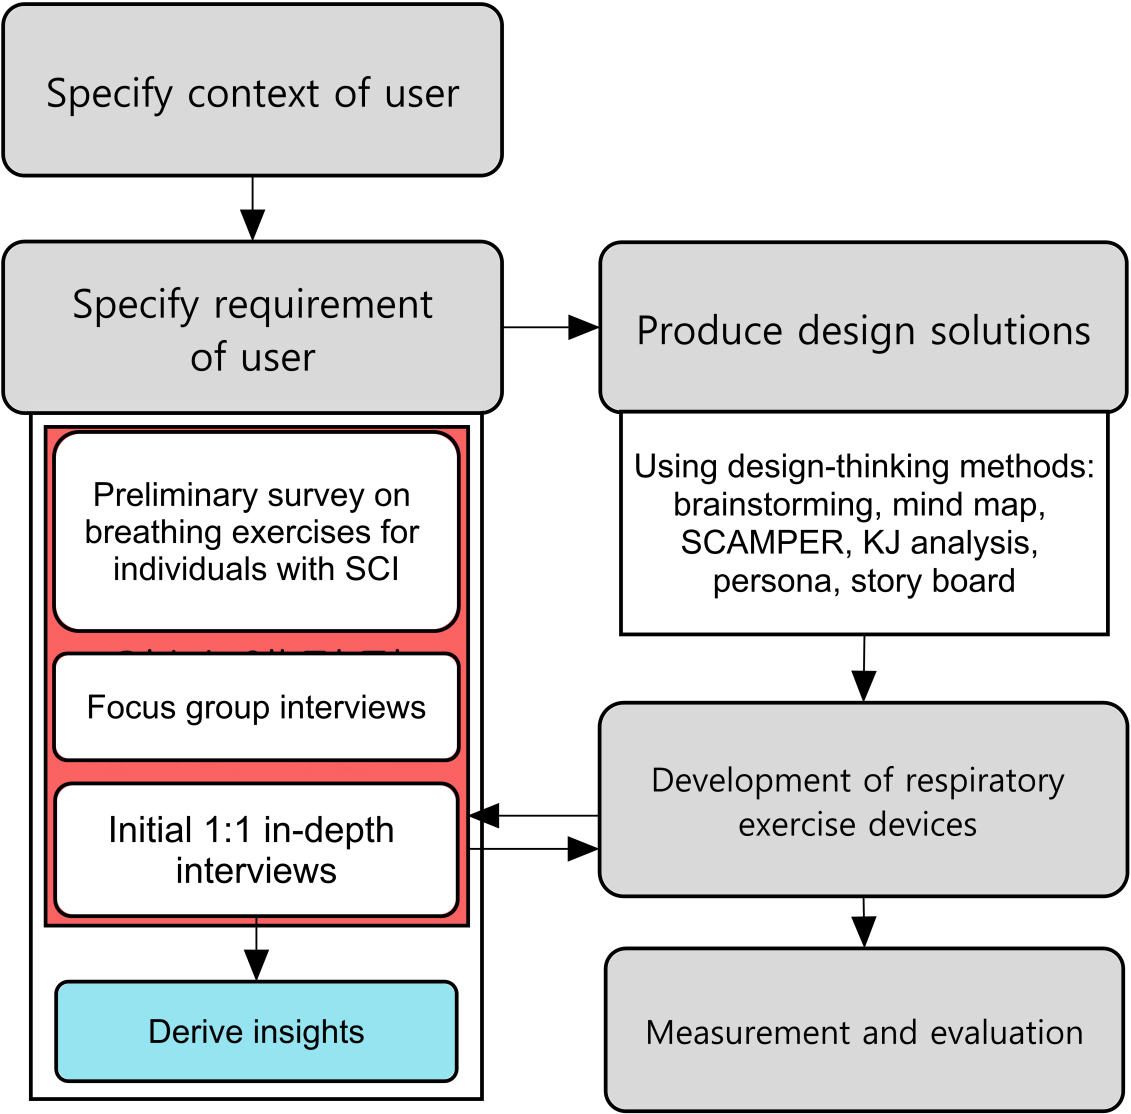 User-centered design process for developing respiratory exercise devices.